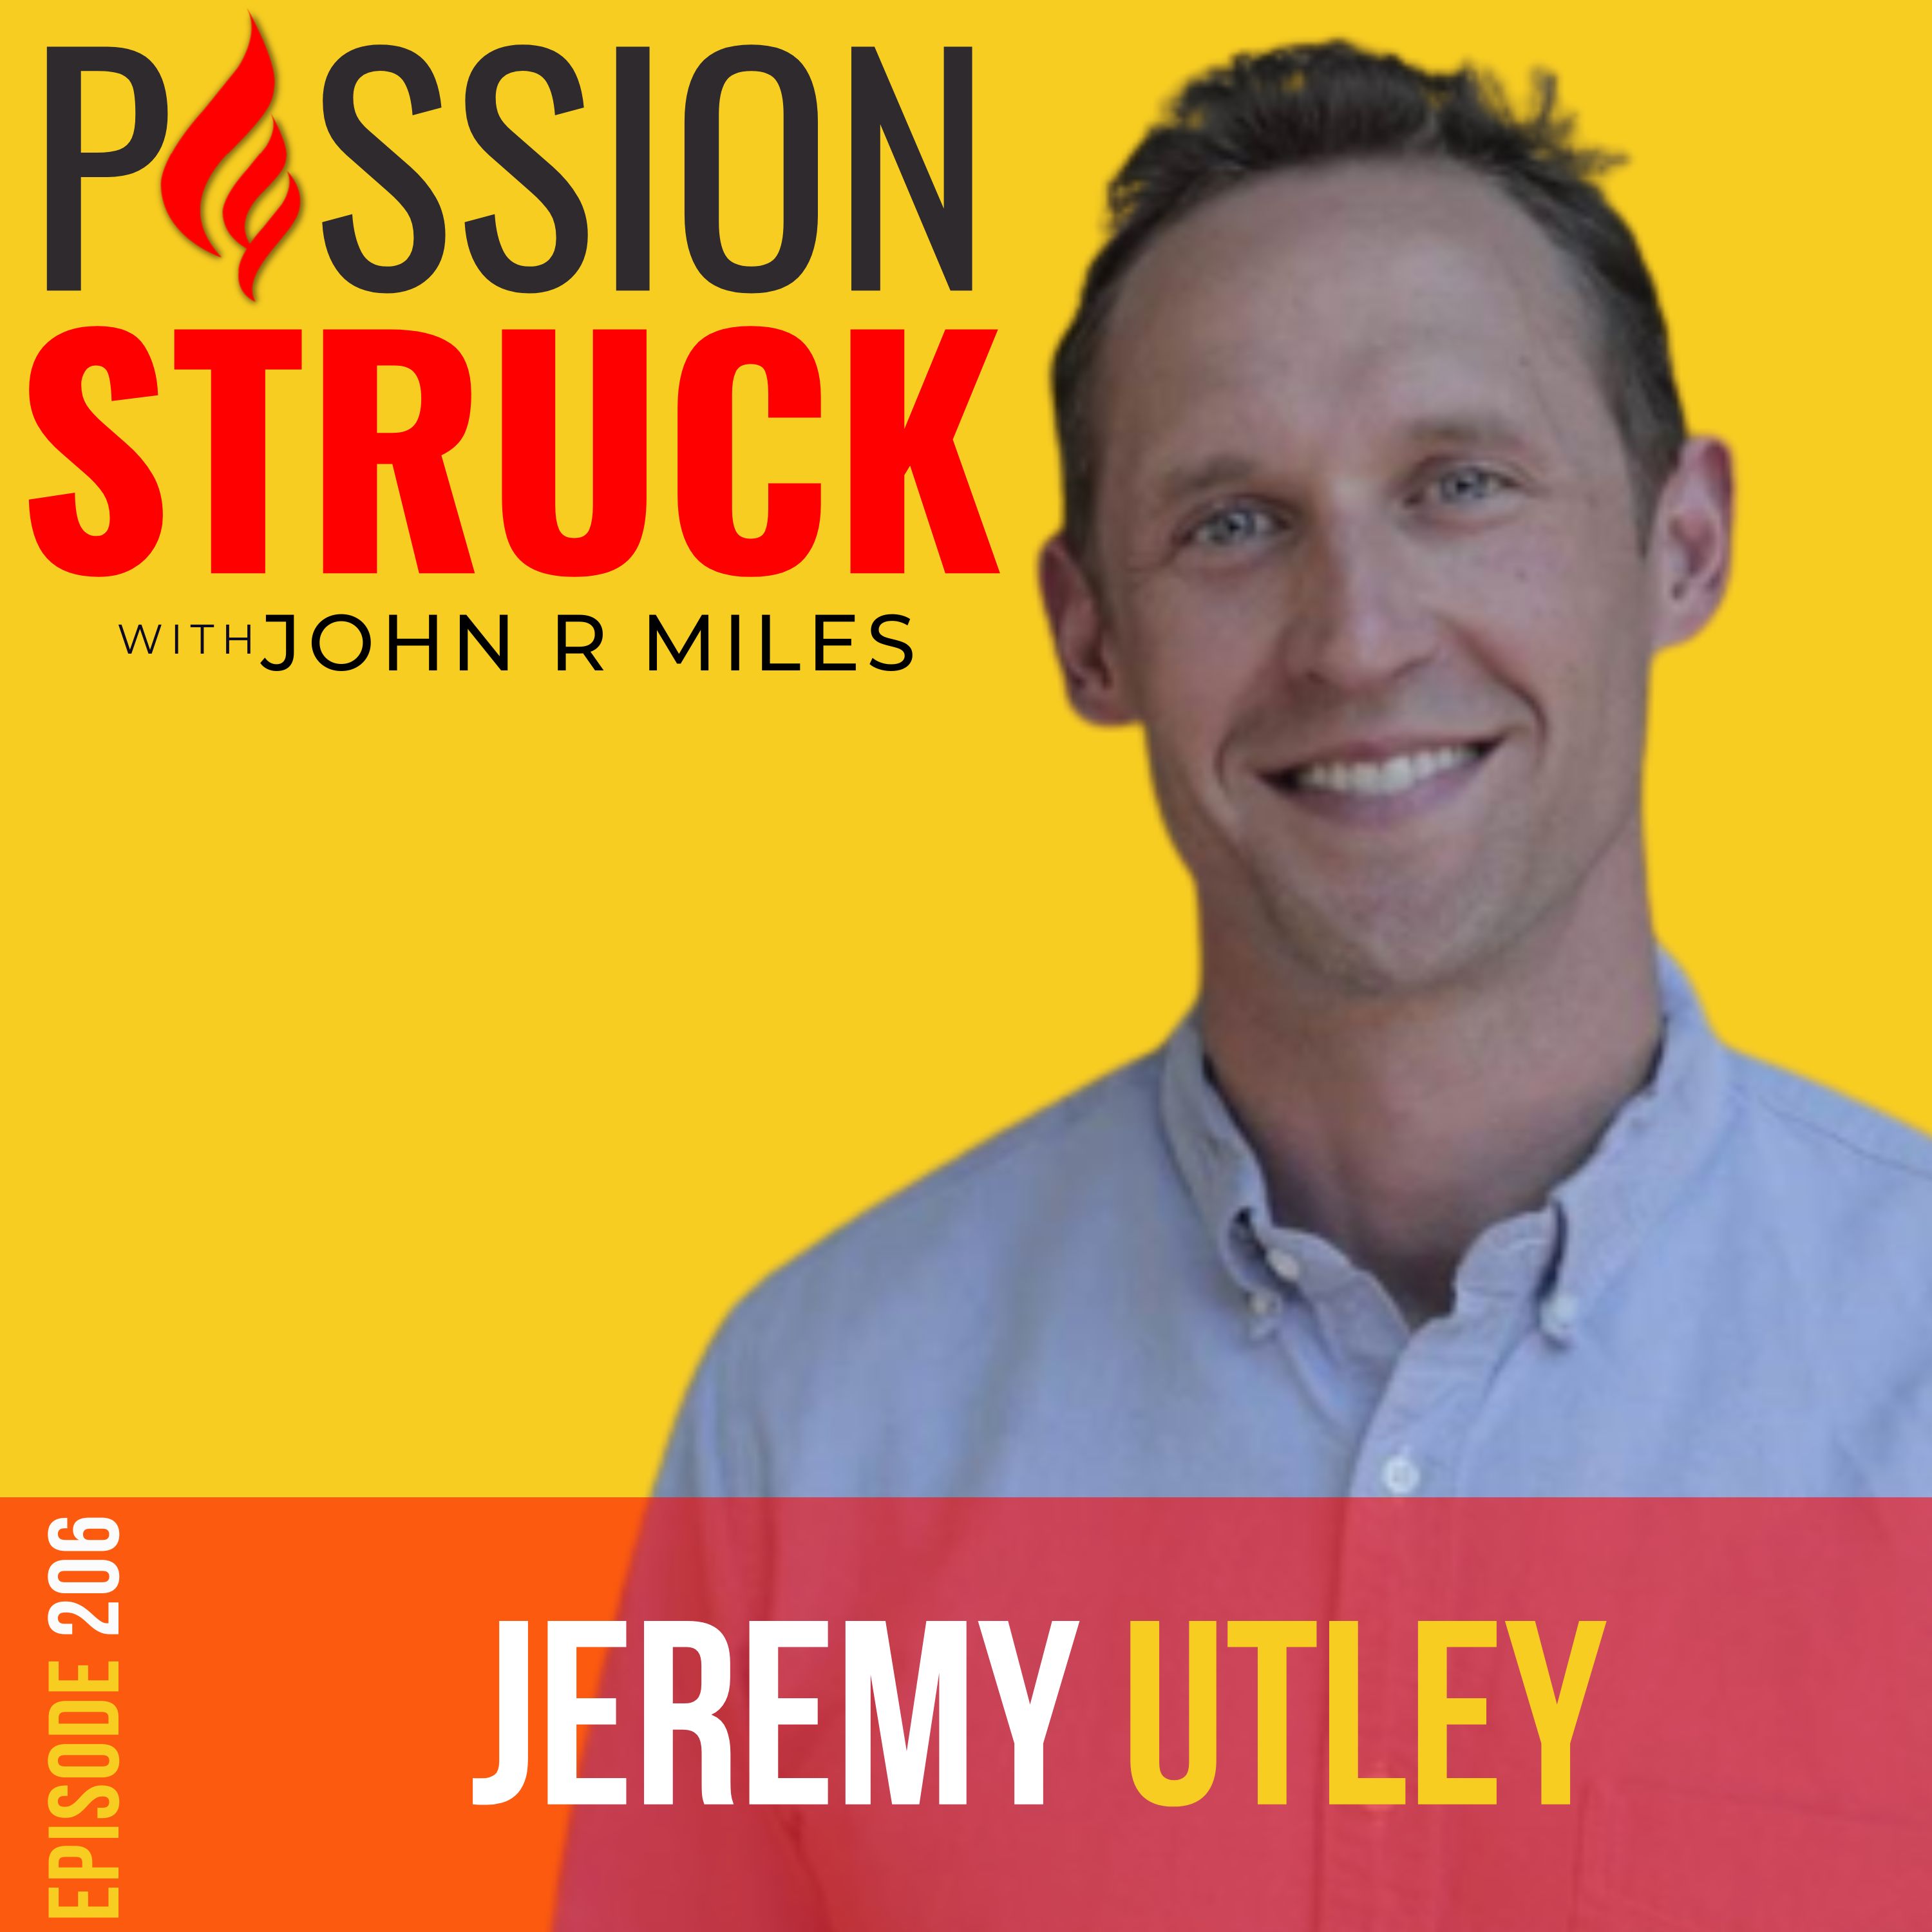 Passion Struck podcast album cover episode 206 with Jeremy Utley on ideaflow